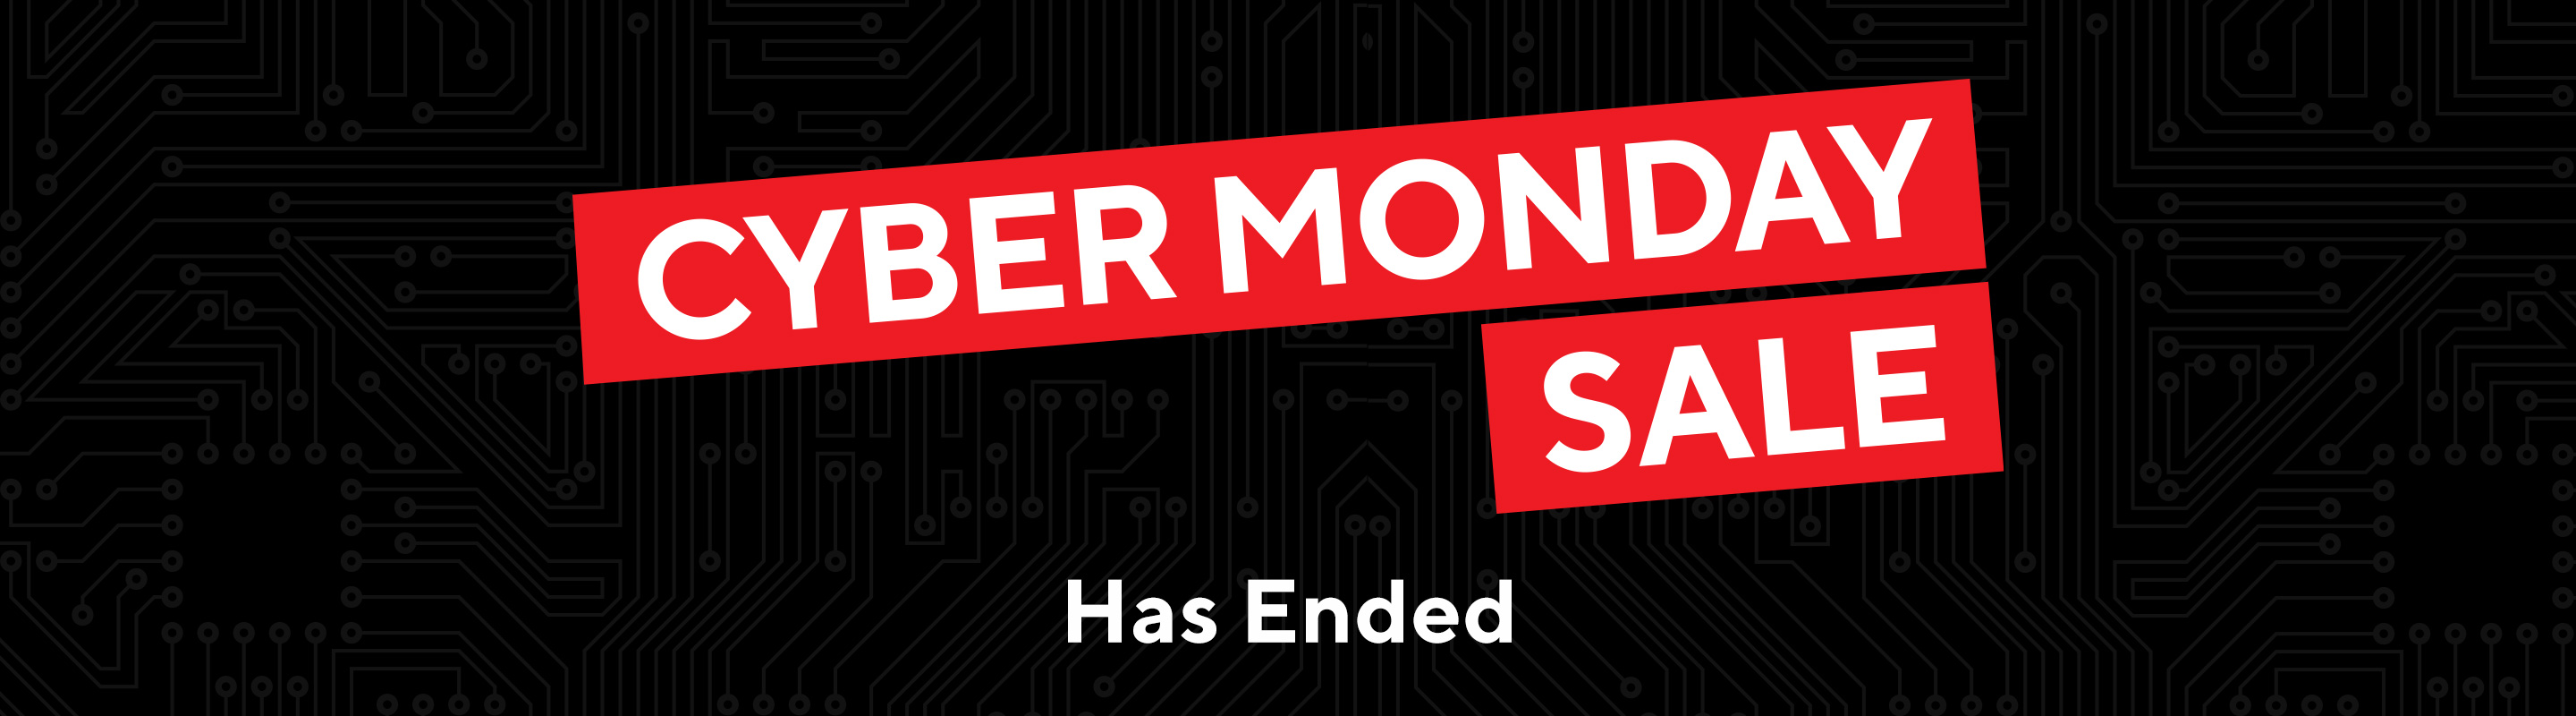 CM sale has ended